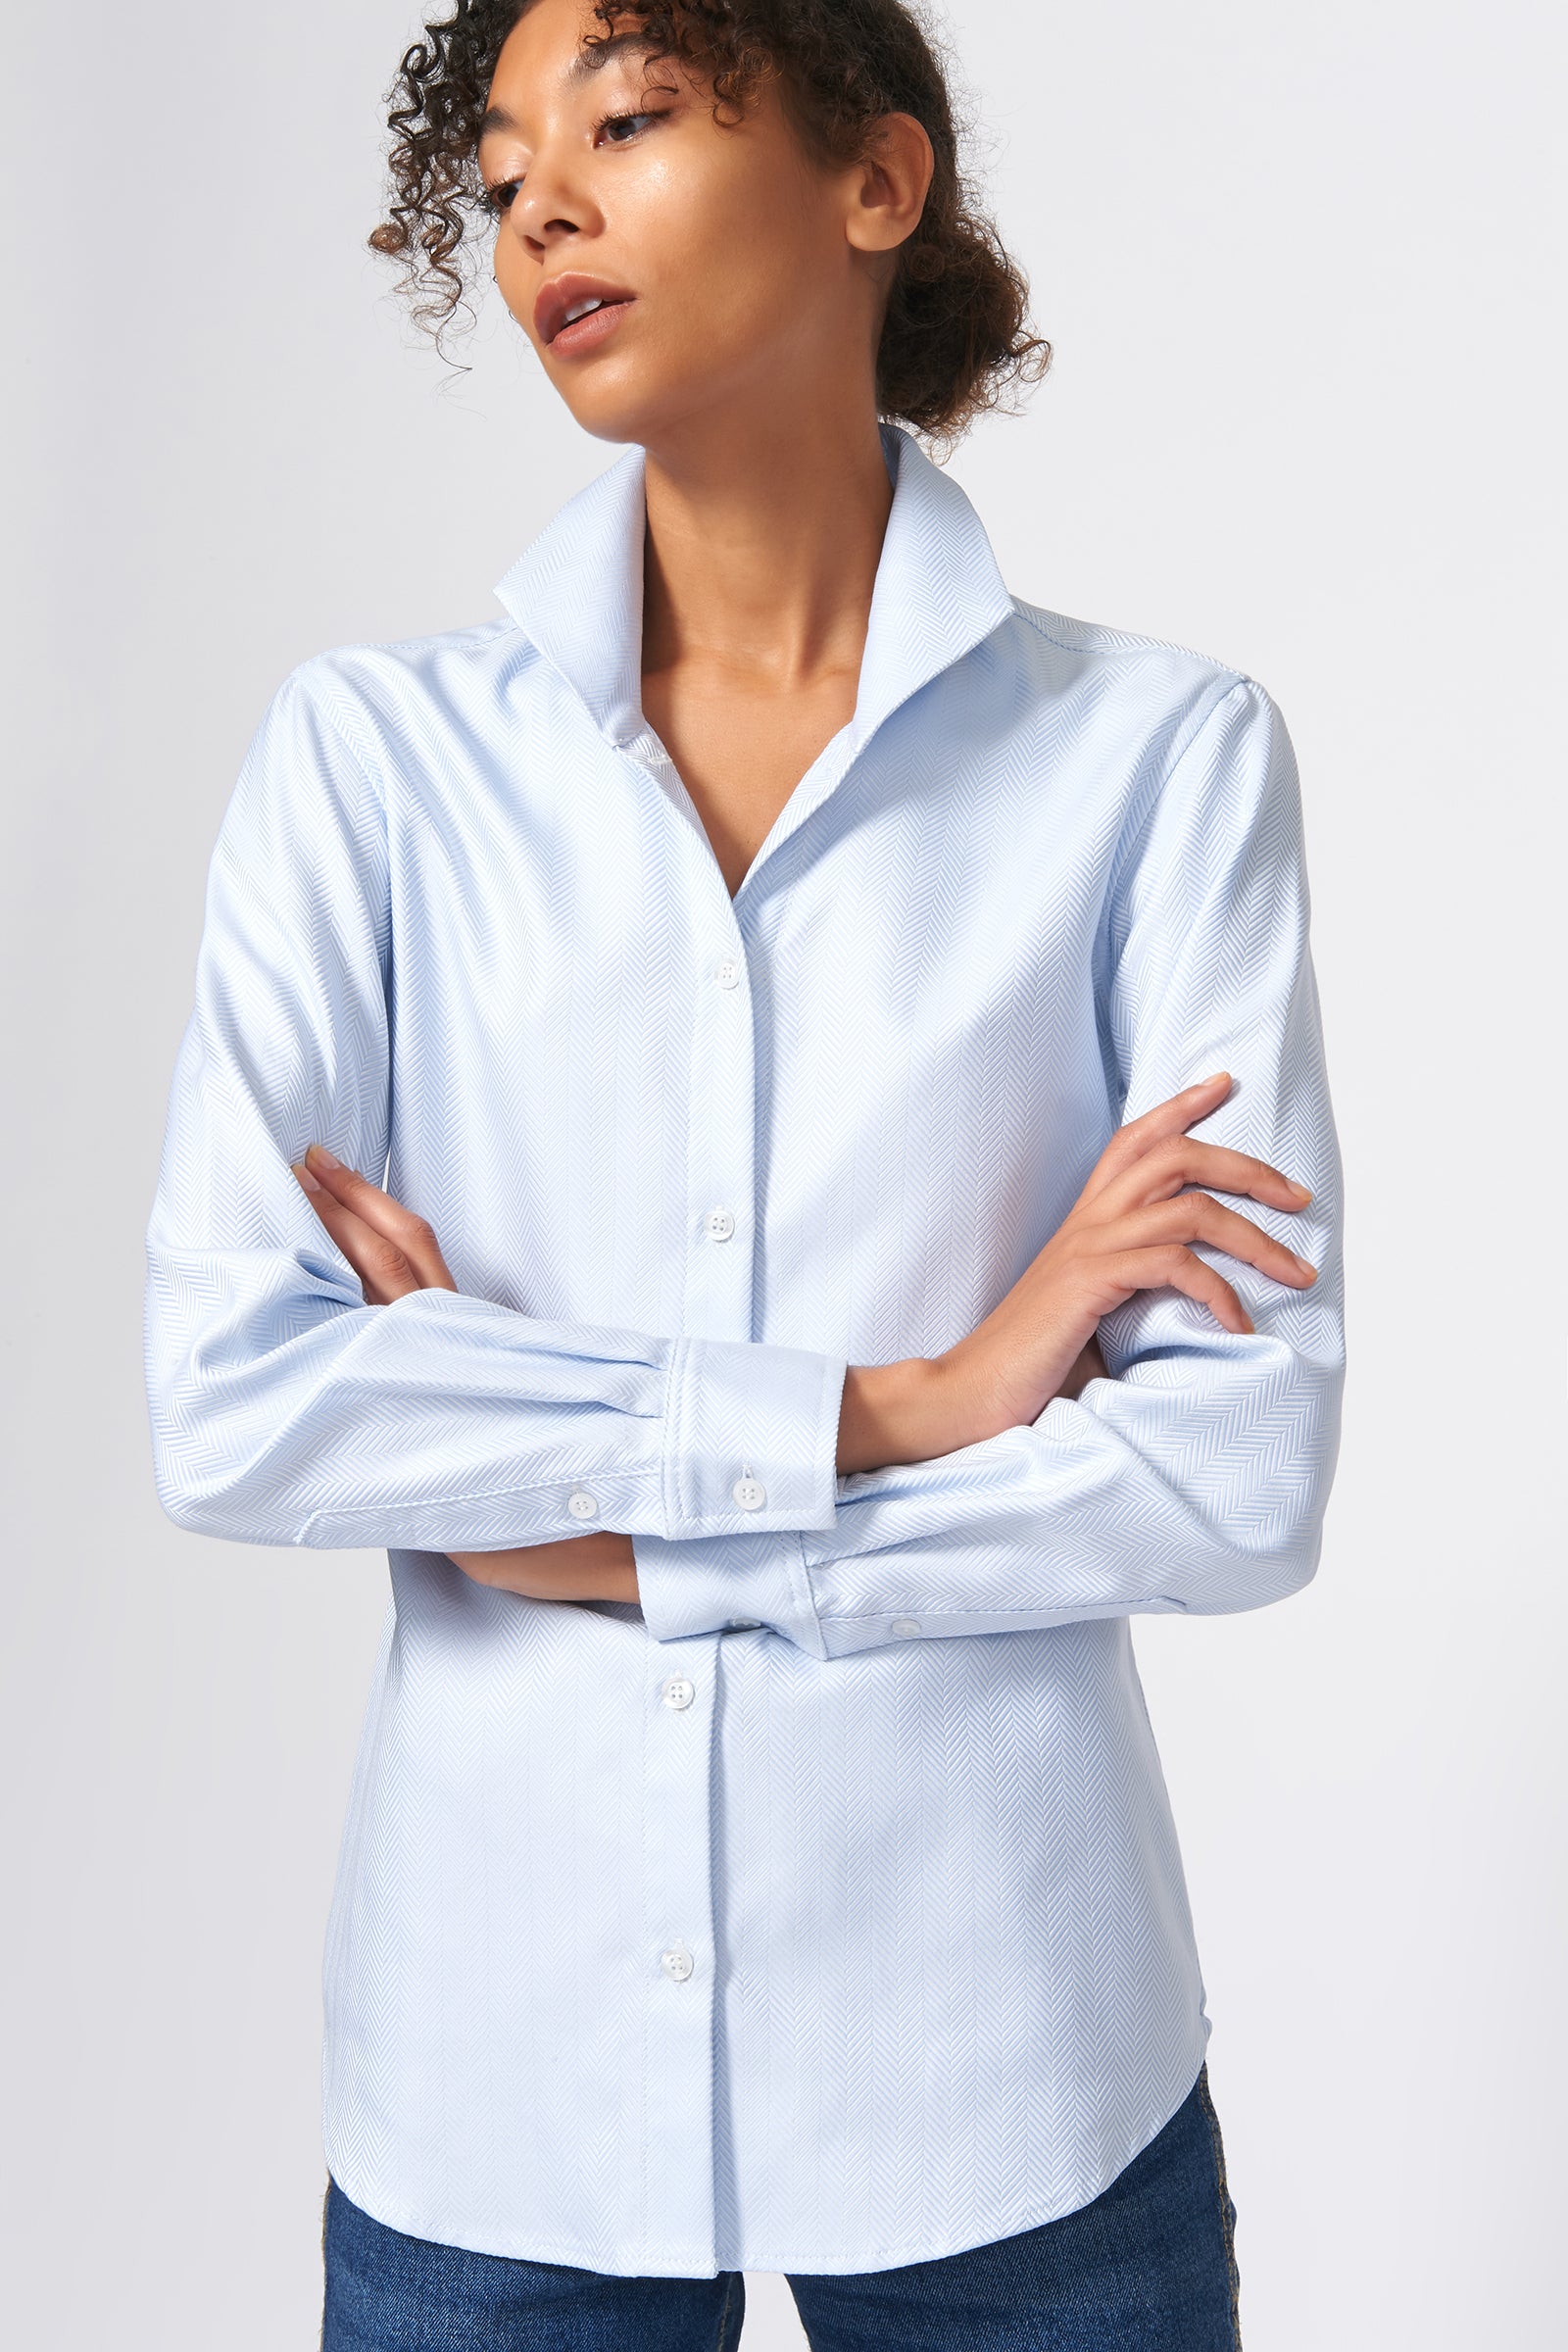 Kal Rieman Ginna Tailored Shirt in French Blue Herringbone on Model Front View